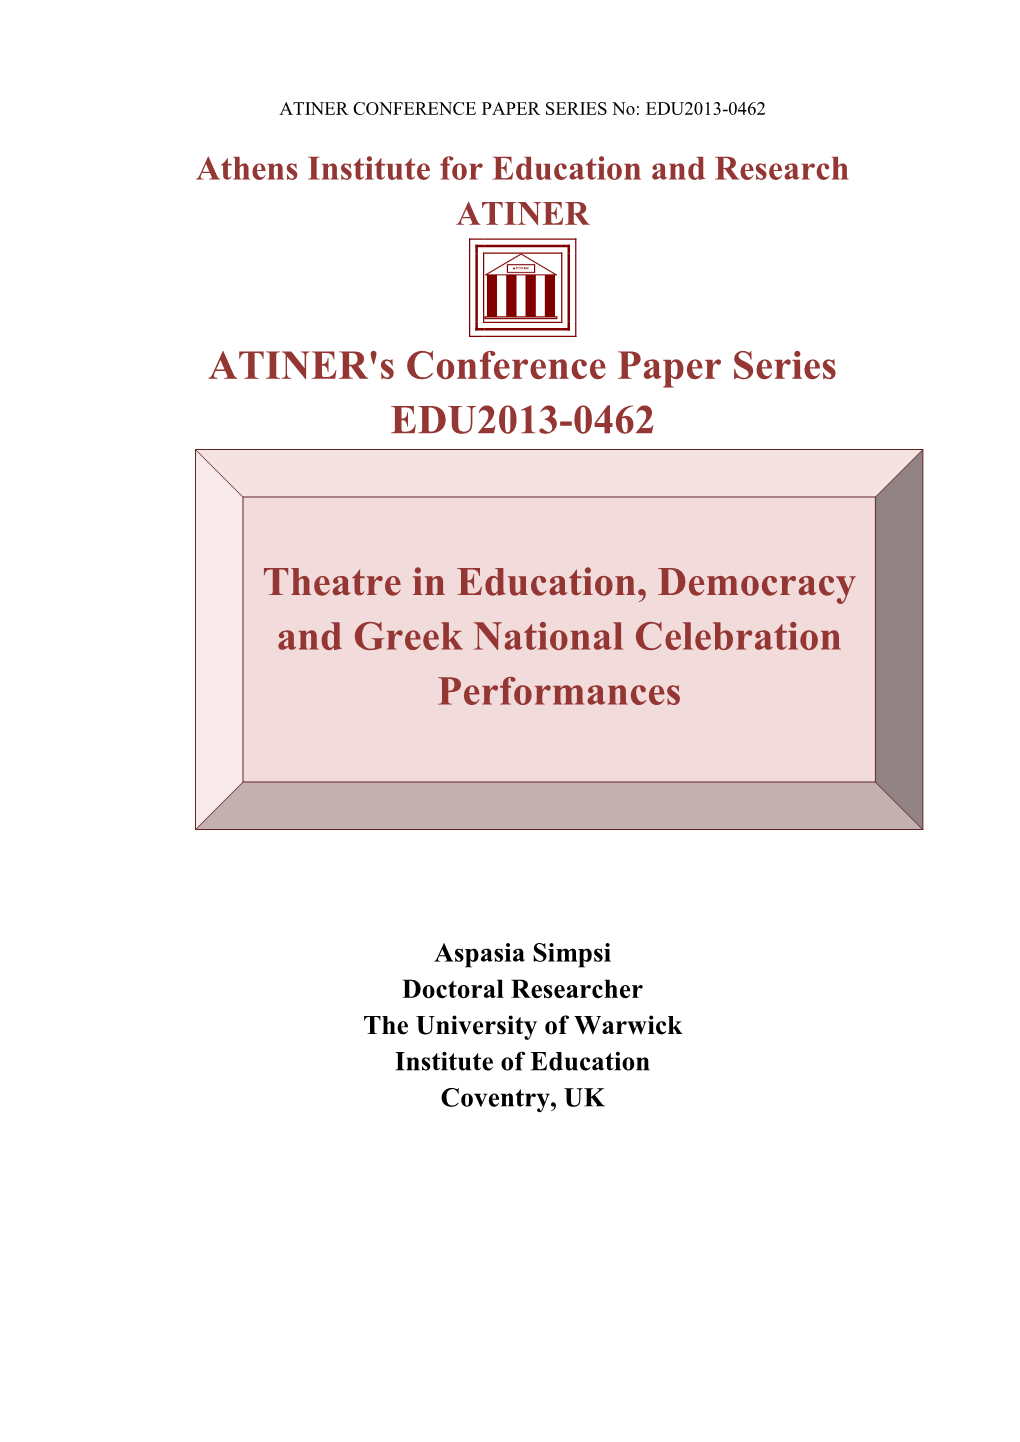 ATINER's Conference Paper Series EDU2013-0462 Theatre In